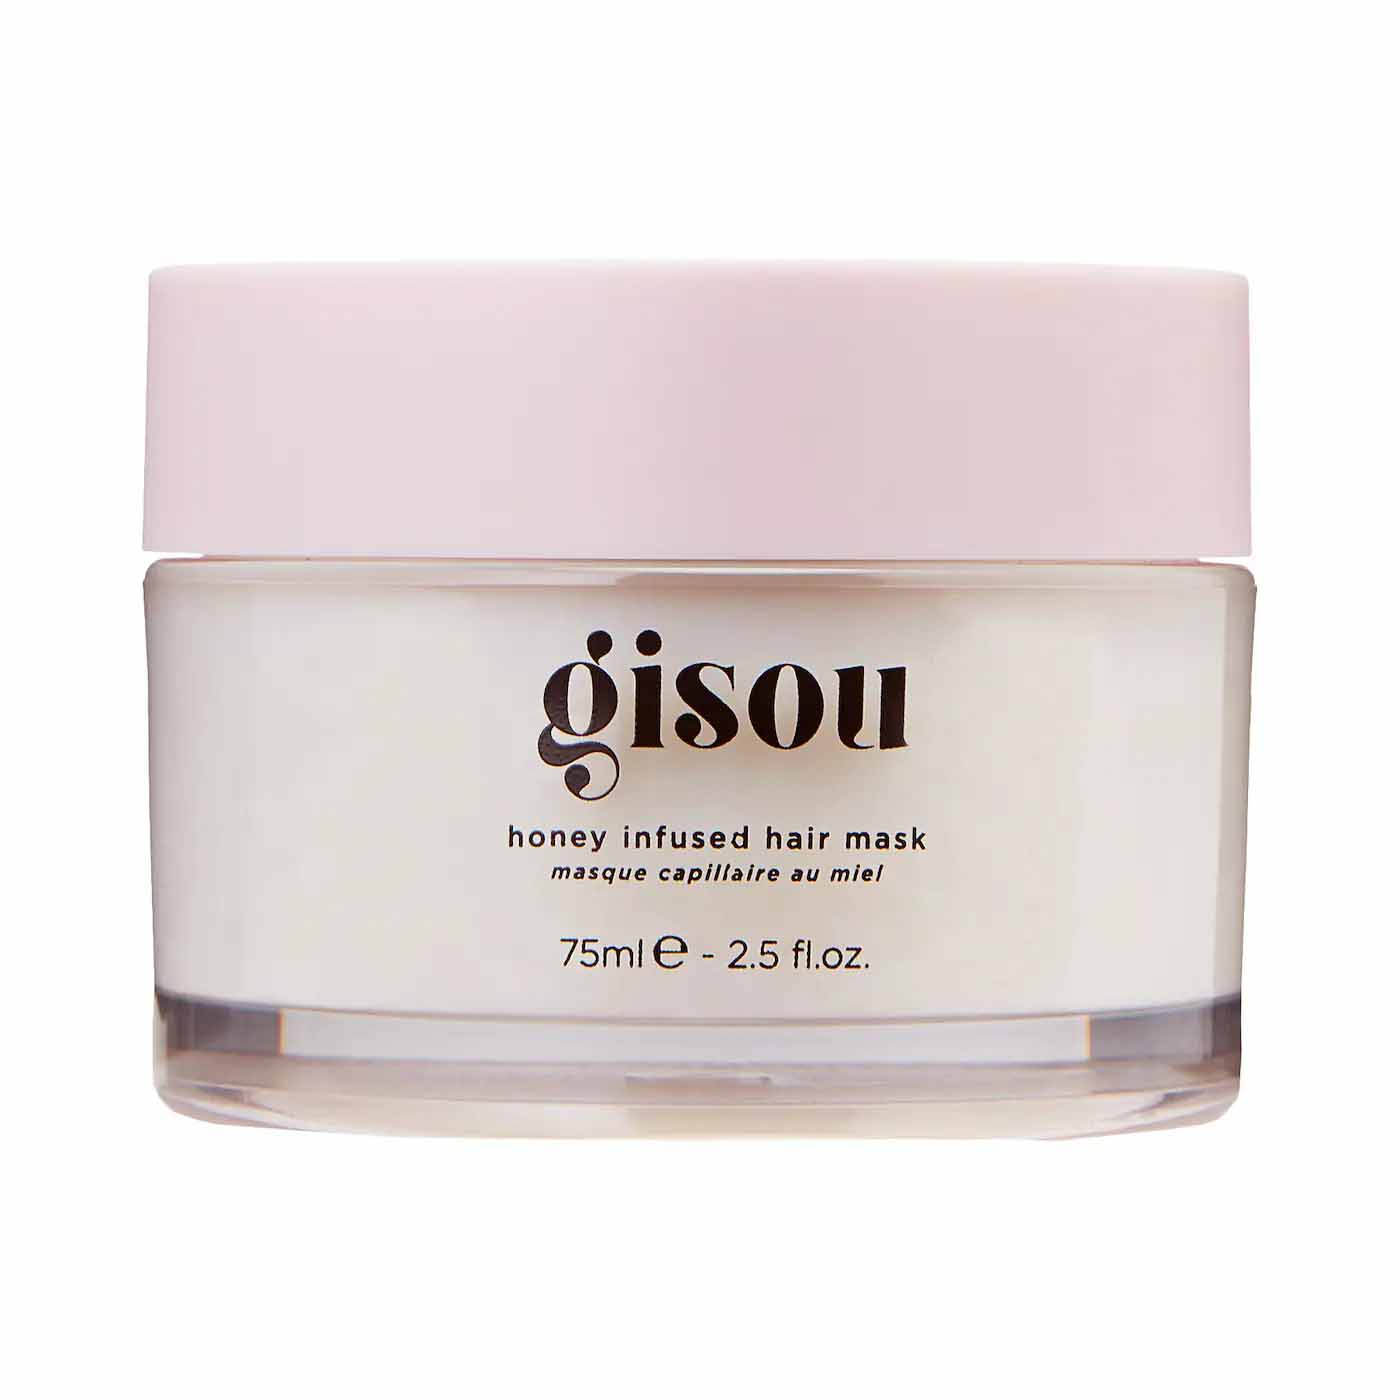 Gisou Mini Honey Infused Hair Mask with pink lid